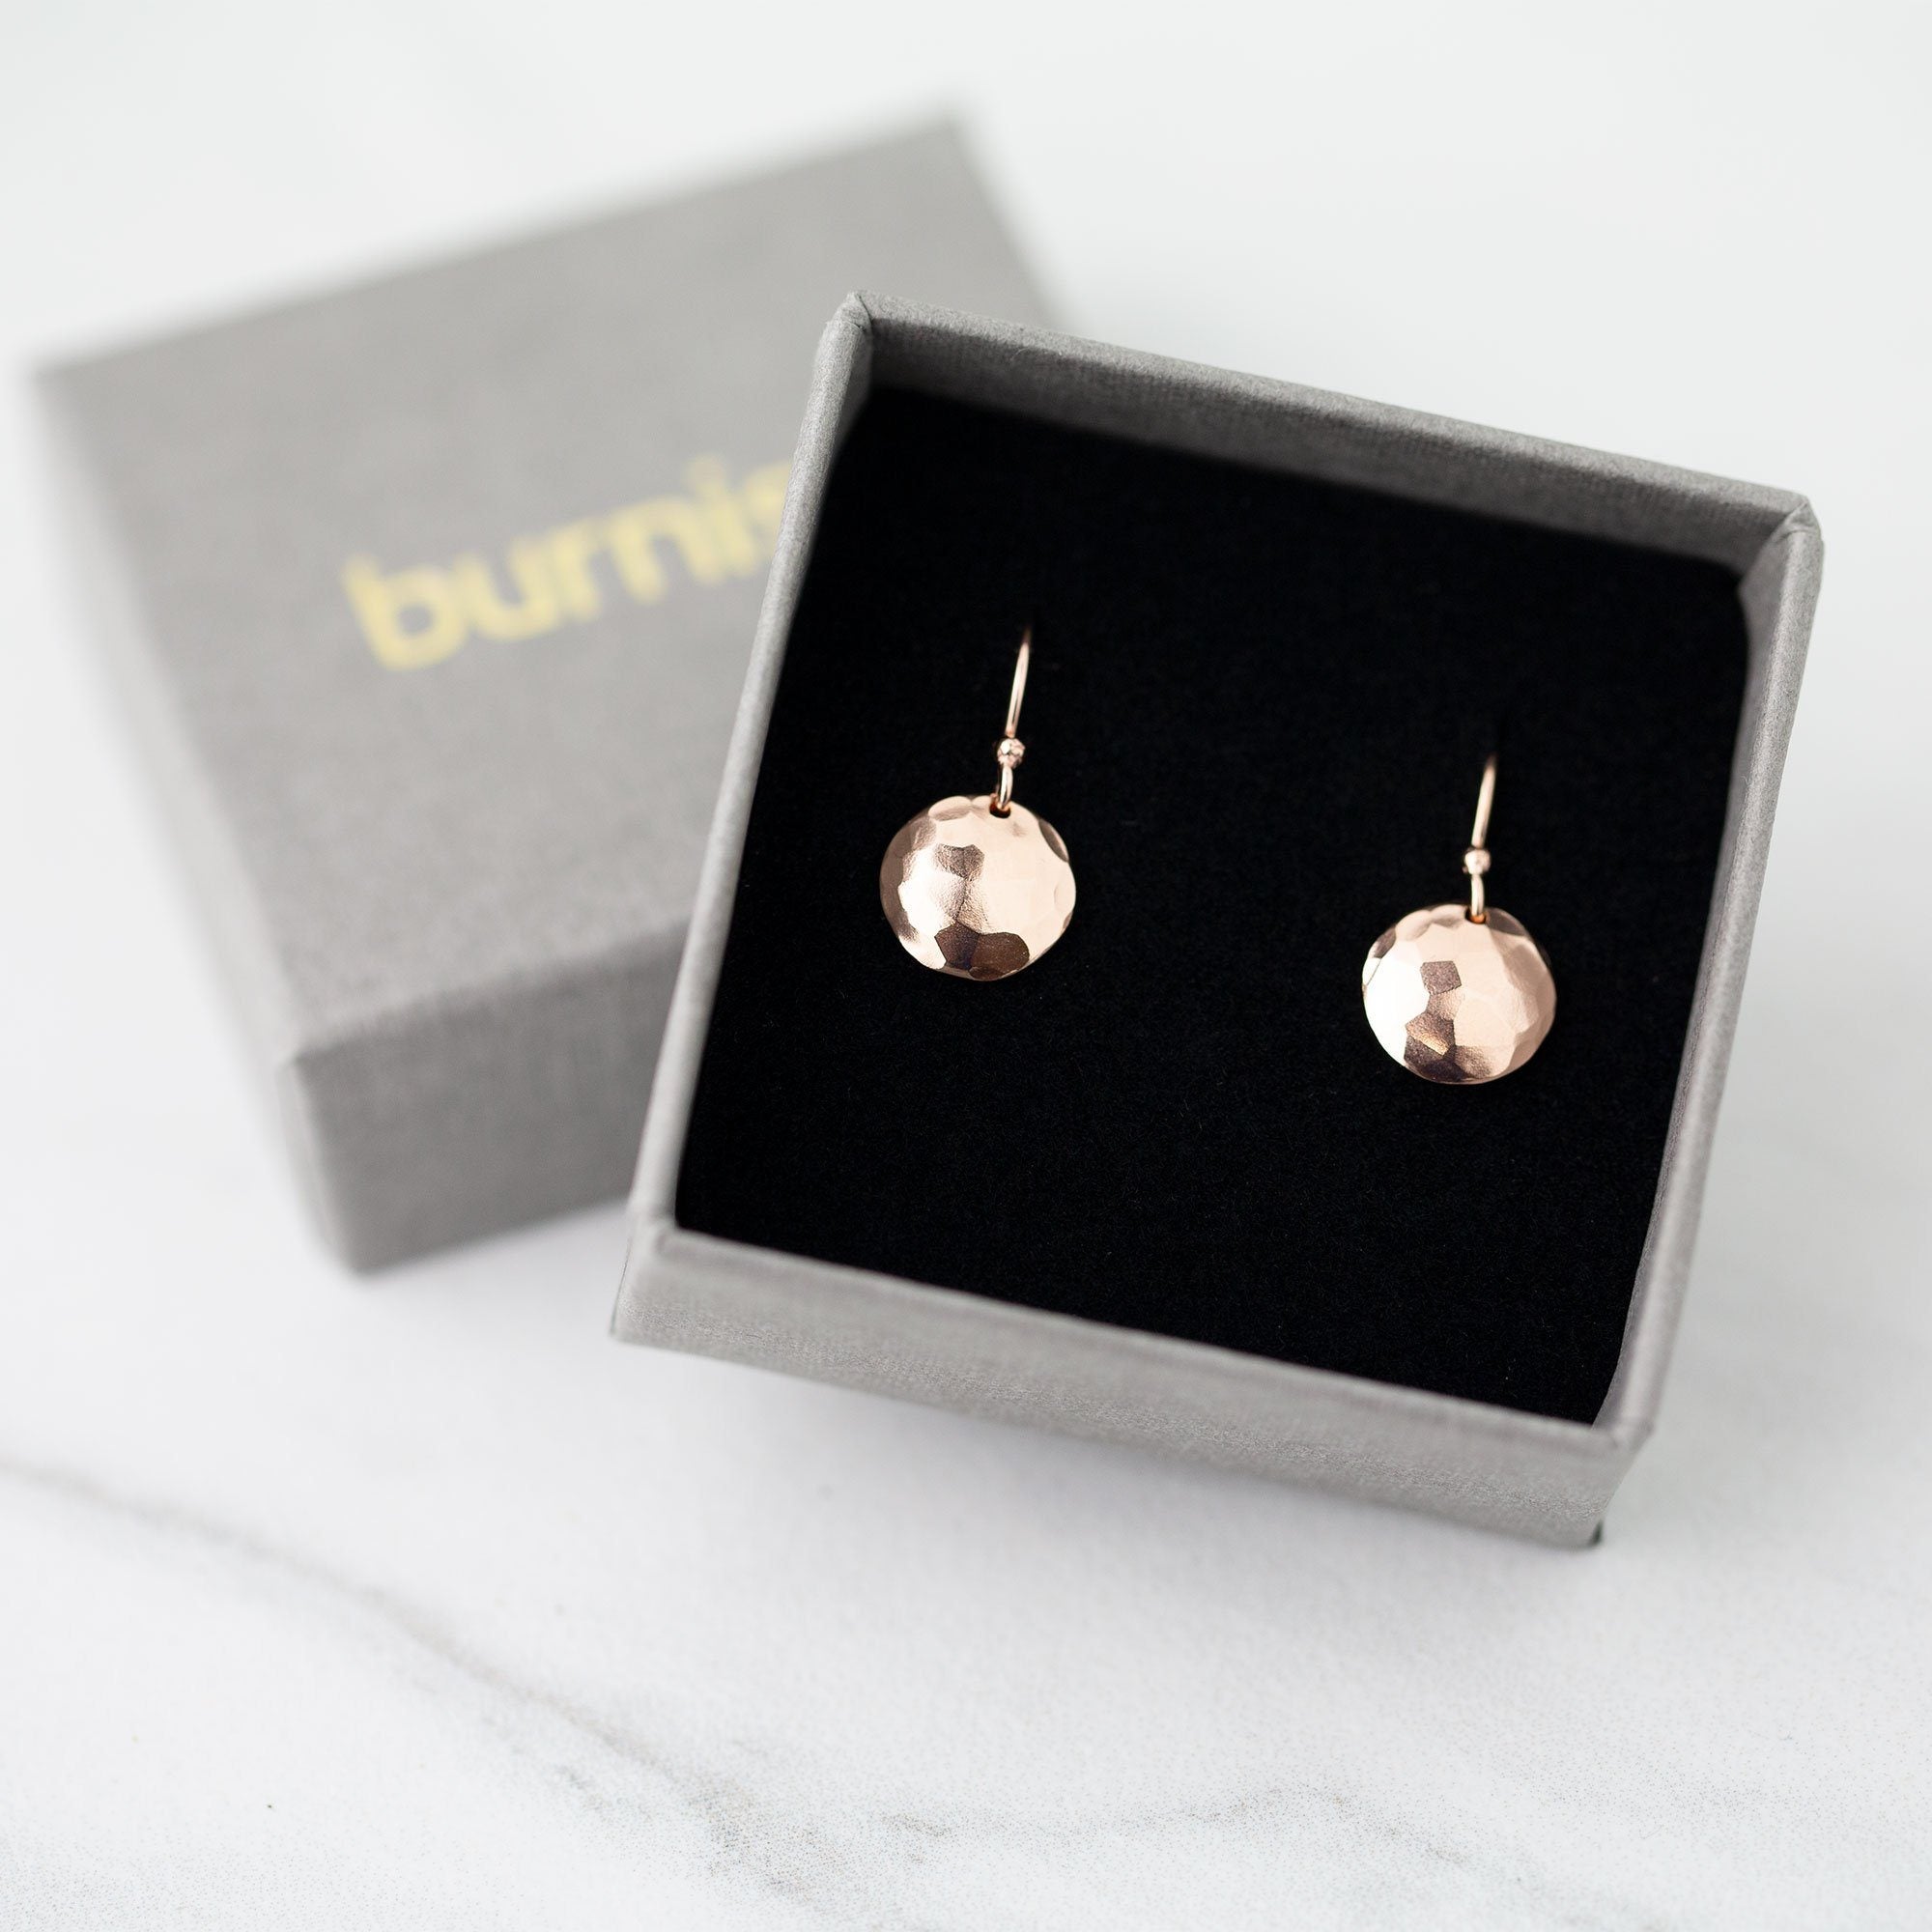 Hammered &amp; Domed Earrings - Rose Gold Fill - Handmade Jewelry by Burnish